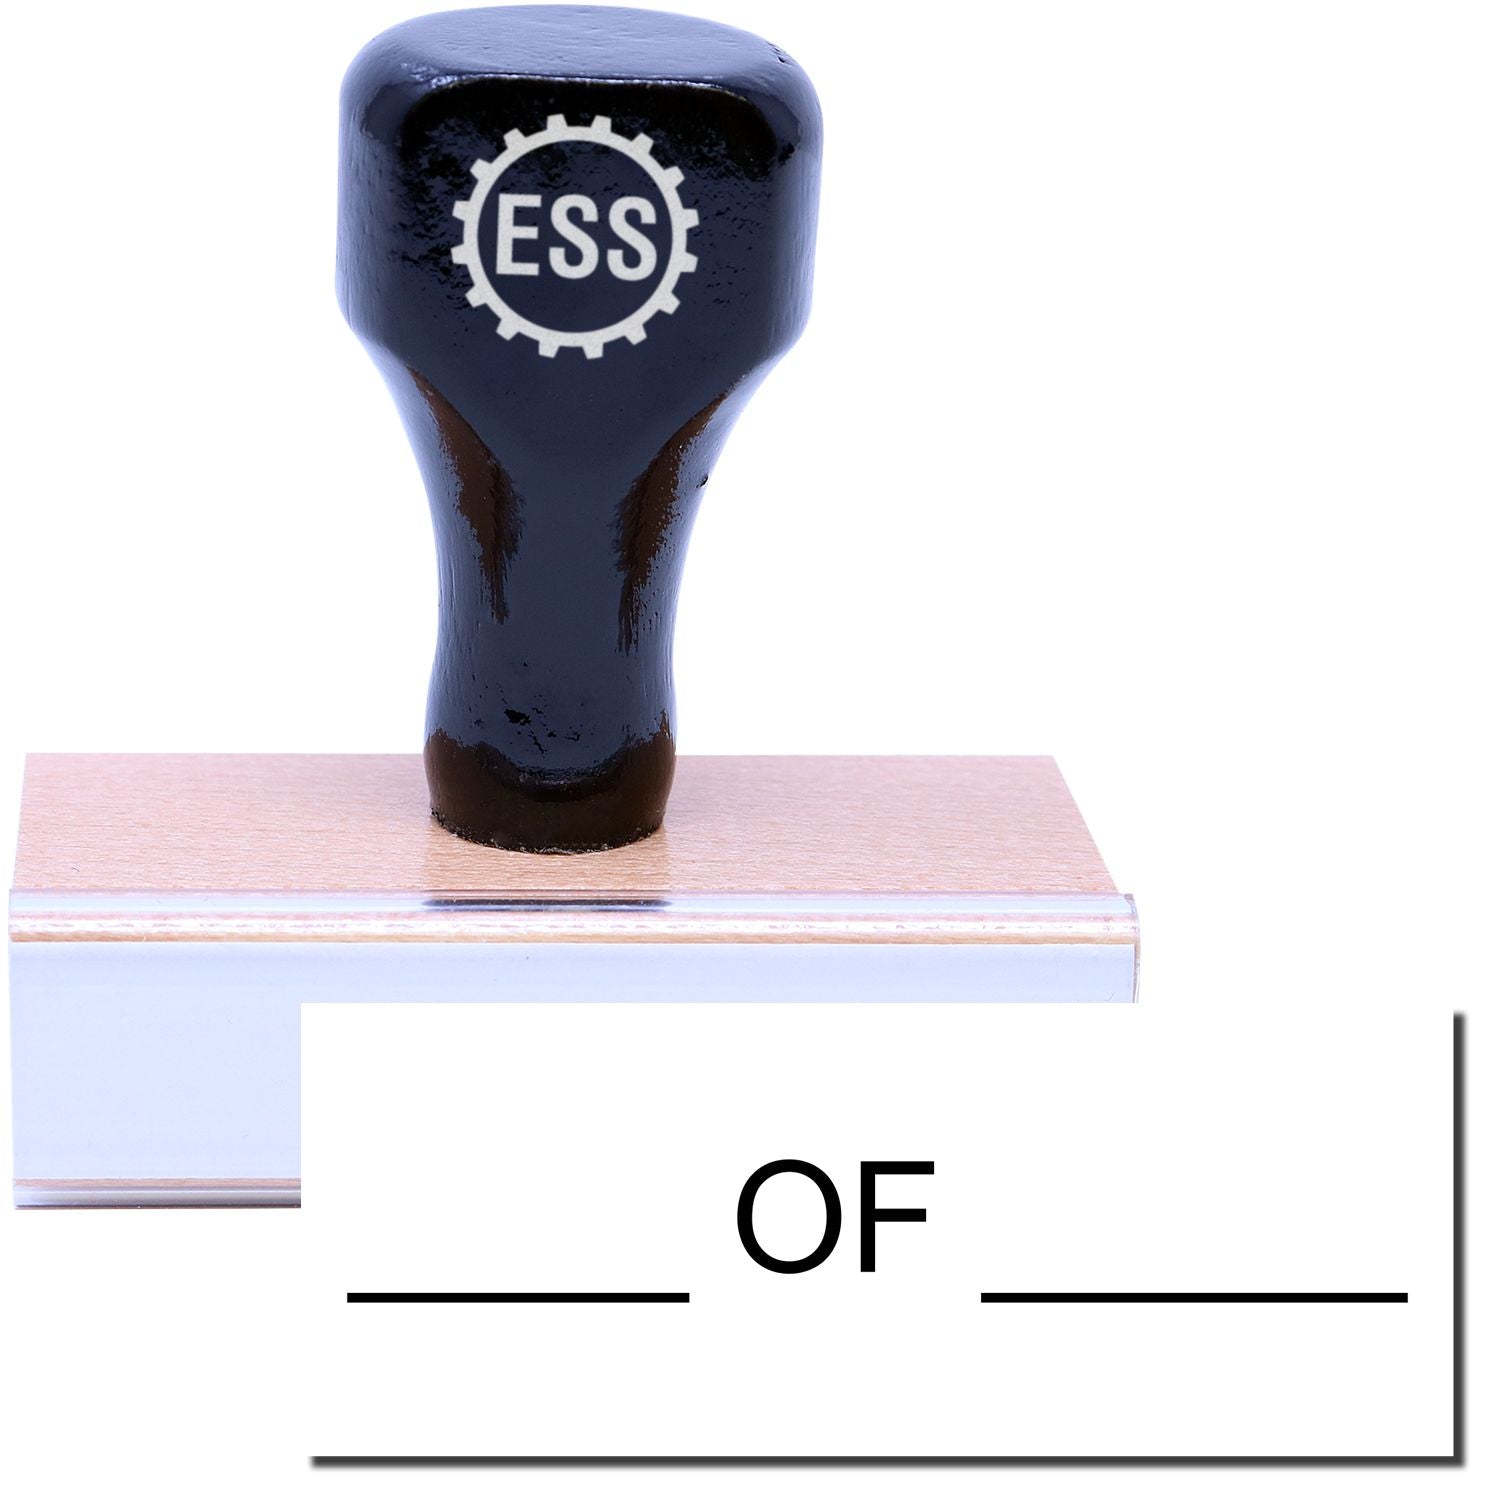 A stock office rubber stamp with a stamped image showing how the text "___ OF ___" in a large font is displayed after stamping.